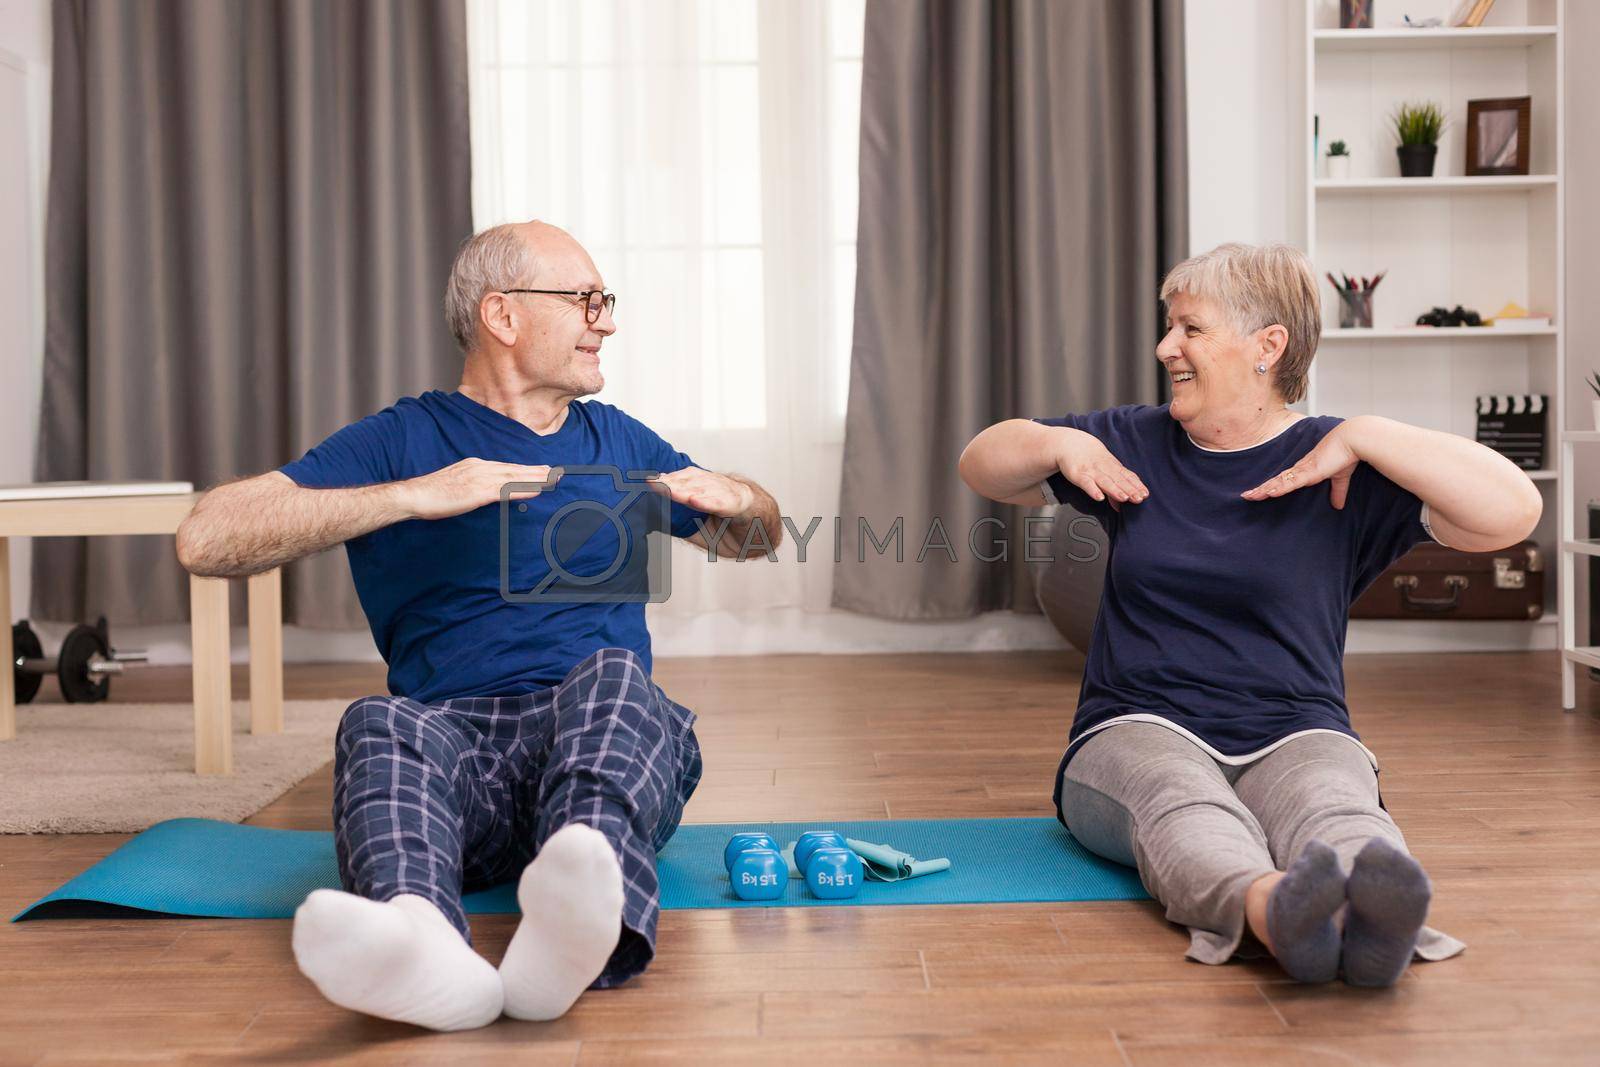 Aged people stretching on yoga mat and smiling at each other. Old person healthy lifestyle exercise at home, workout and training, sport activity at home.